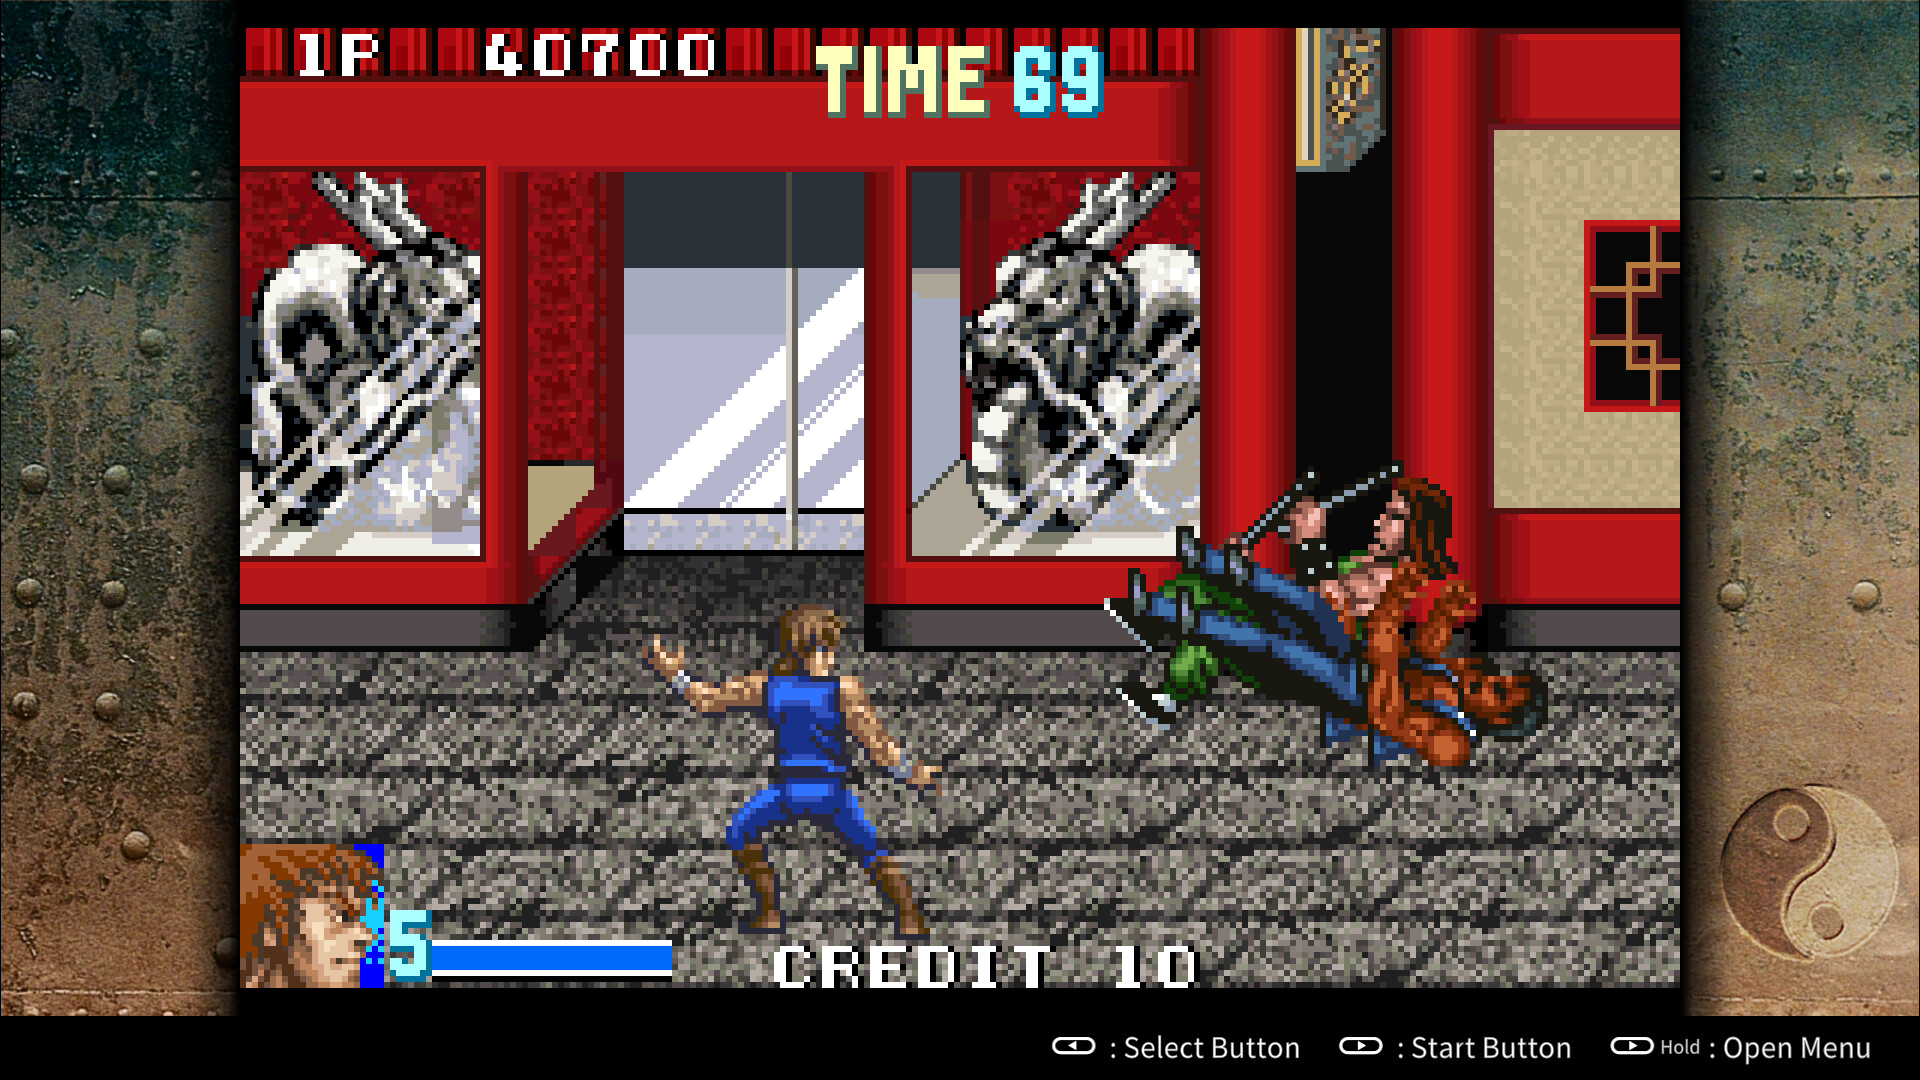 Double Dragon Advance GBA 2 player 60fps 